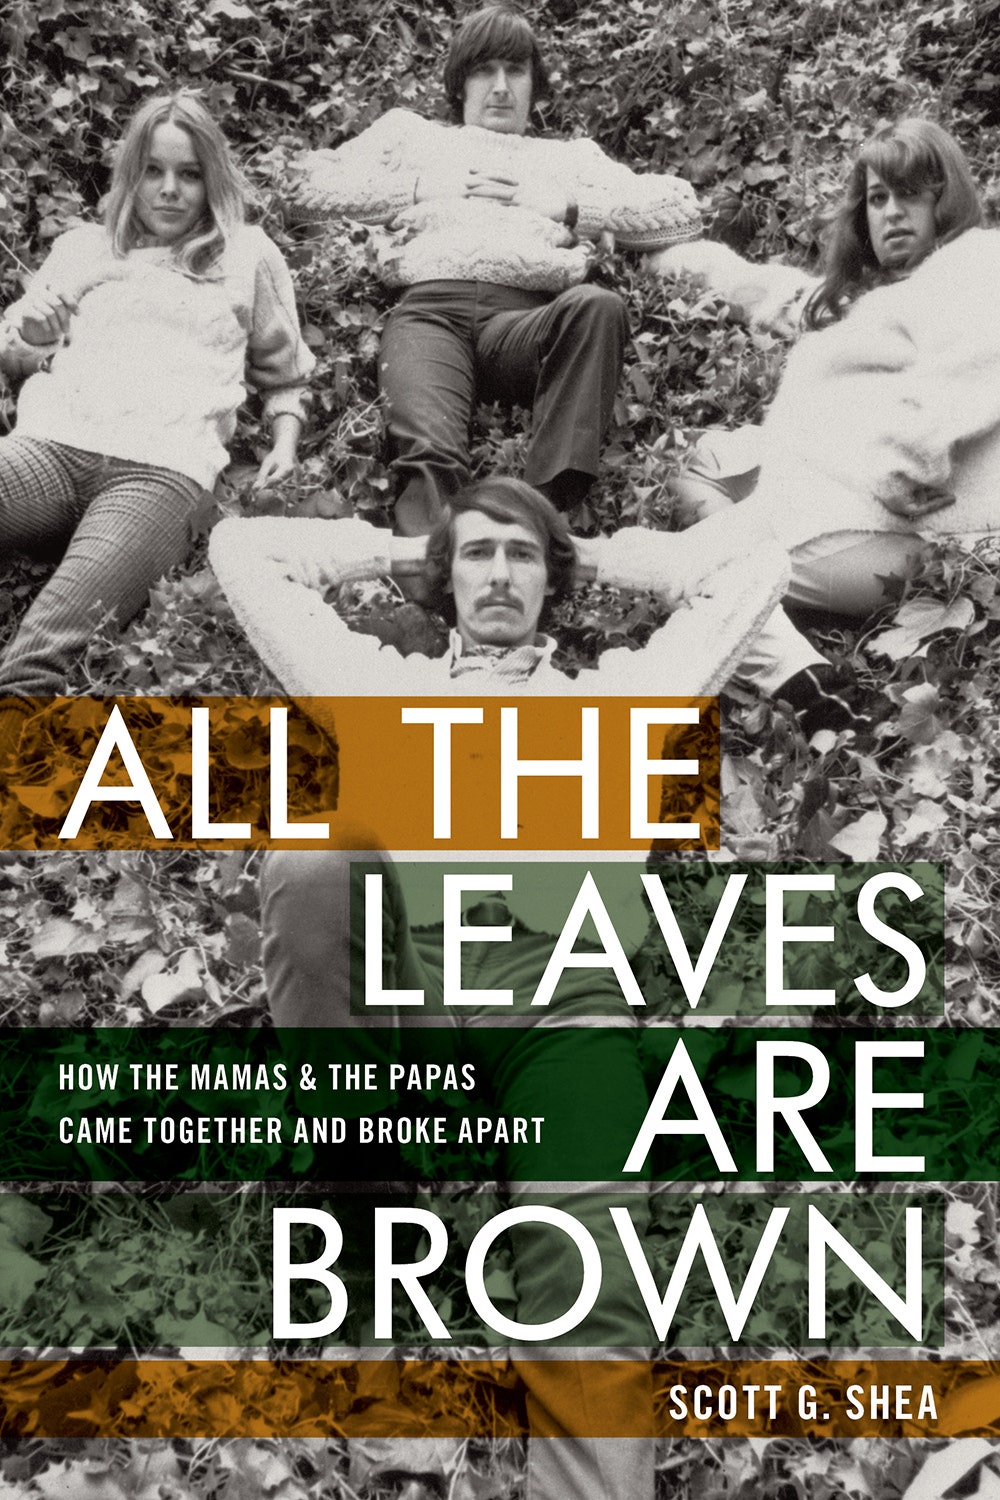 All the Leaves are brown book cover